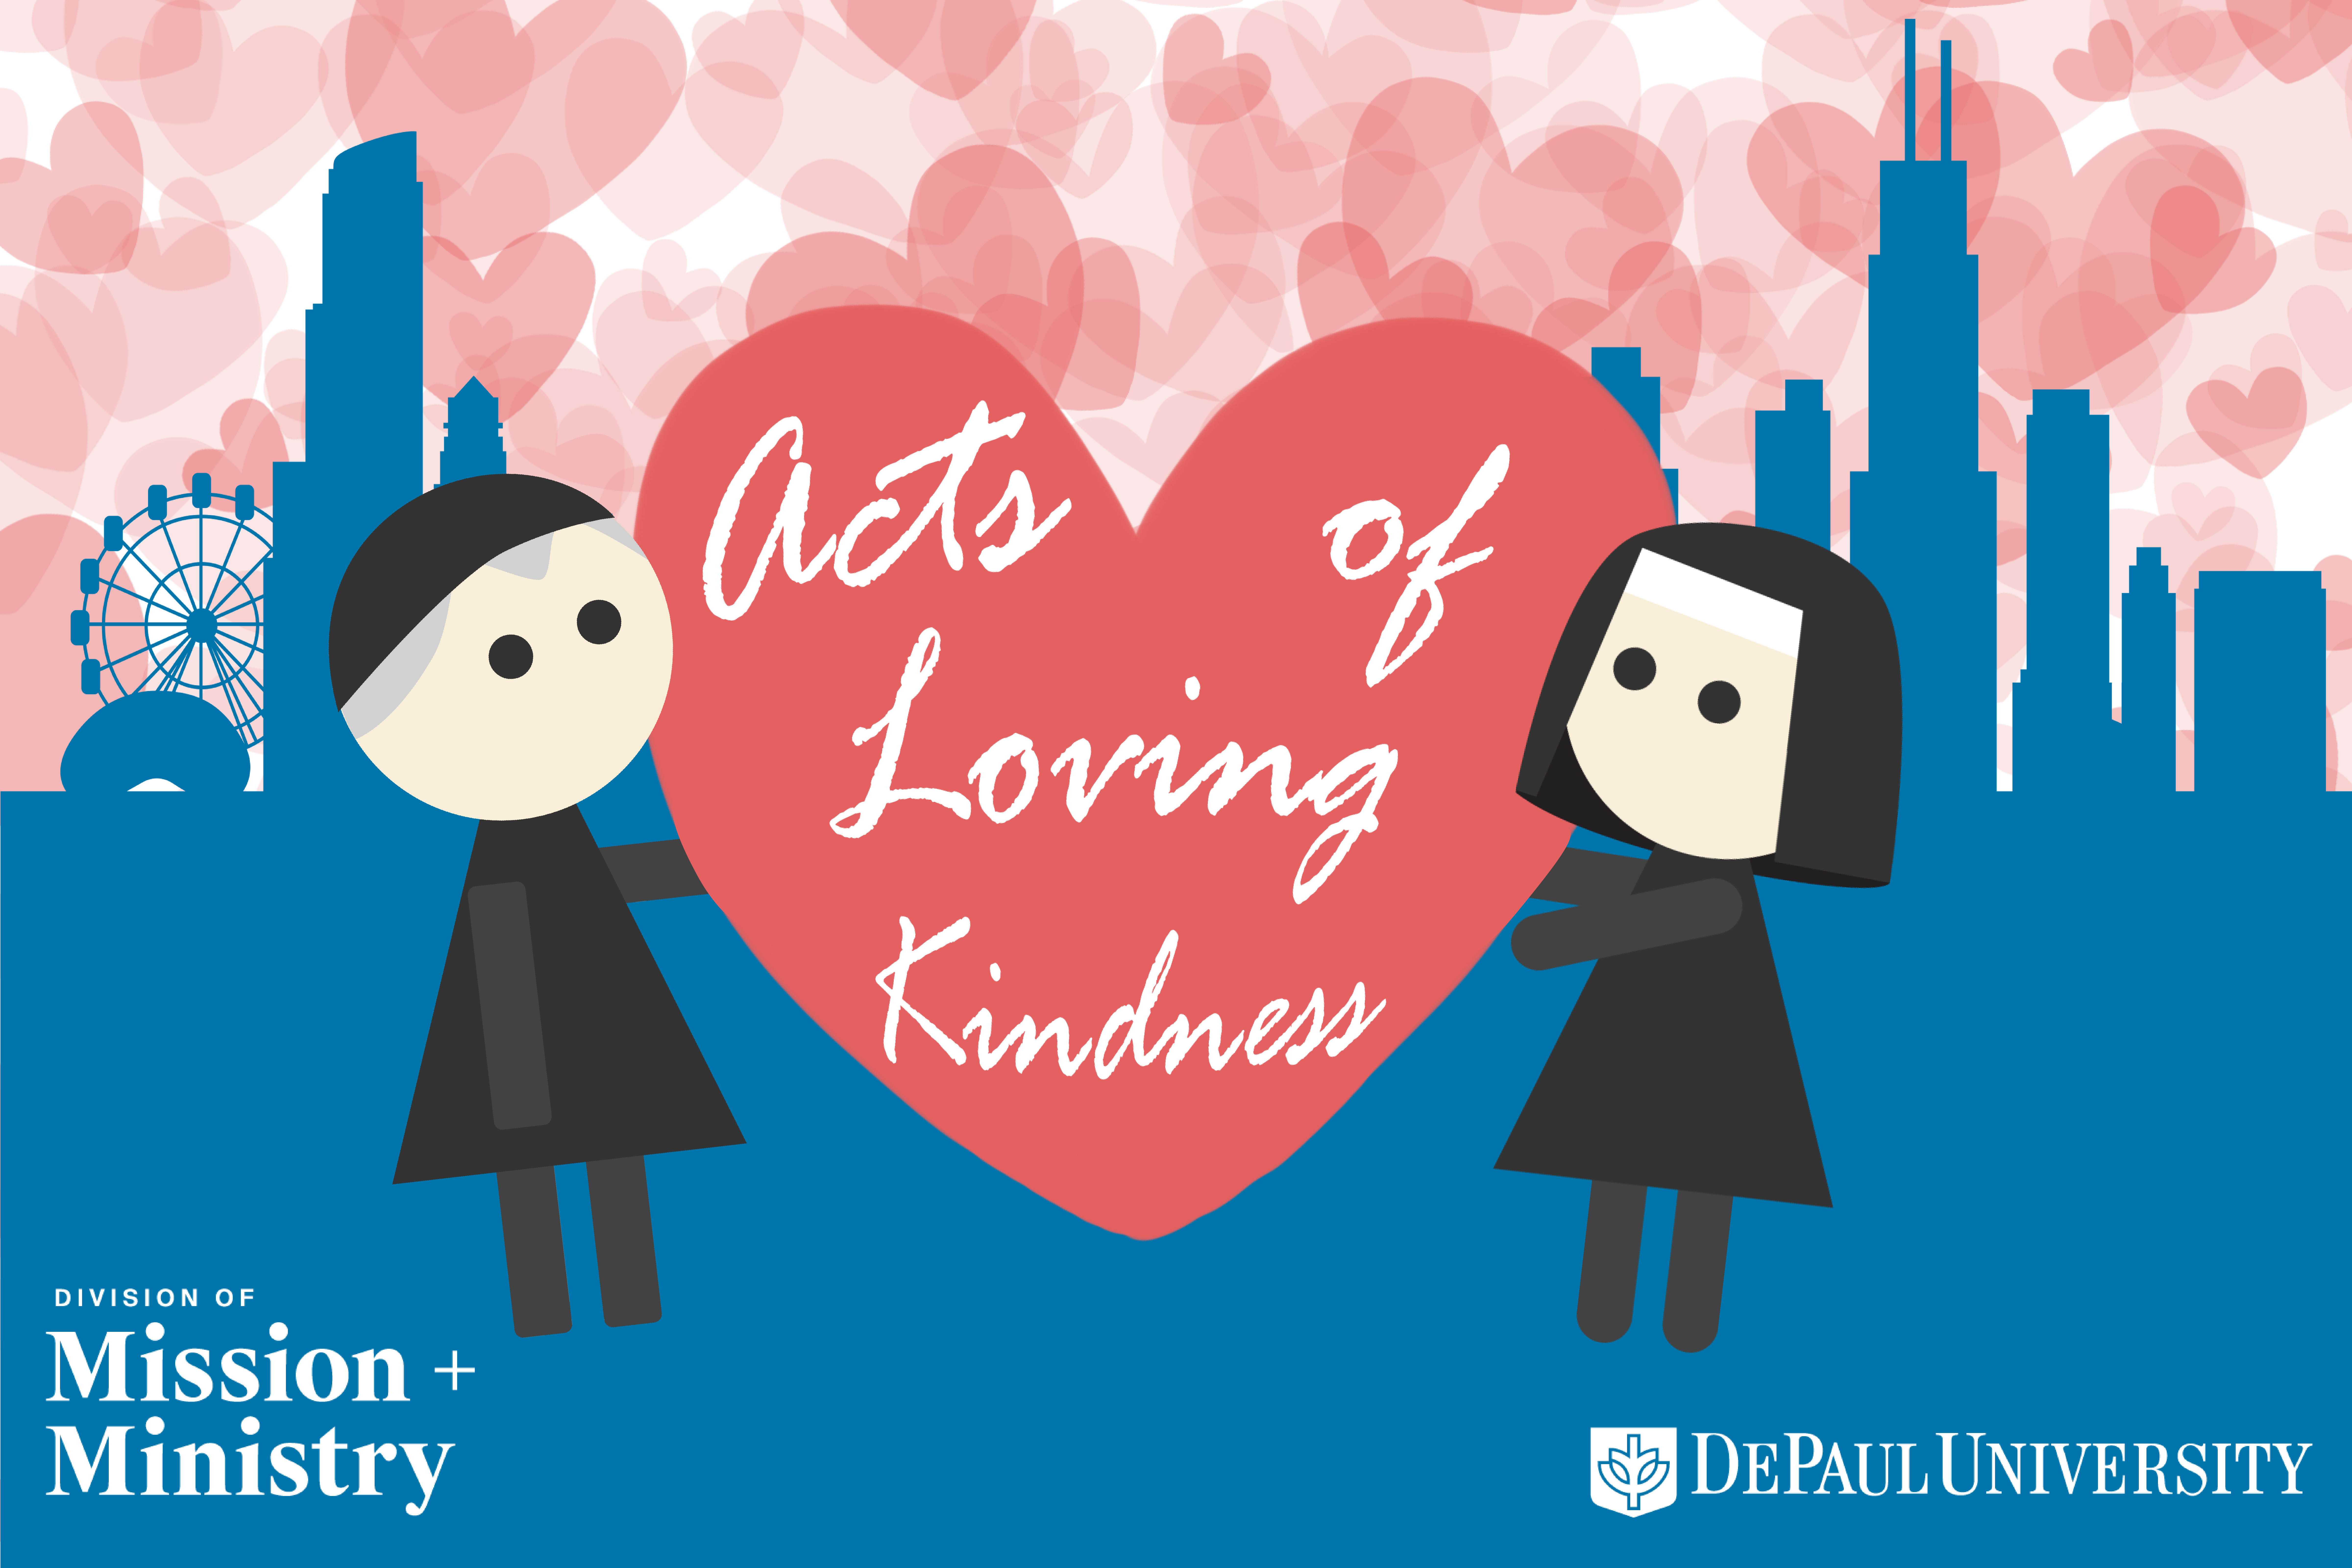 Acts of Loving Kindness